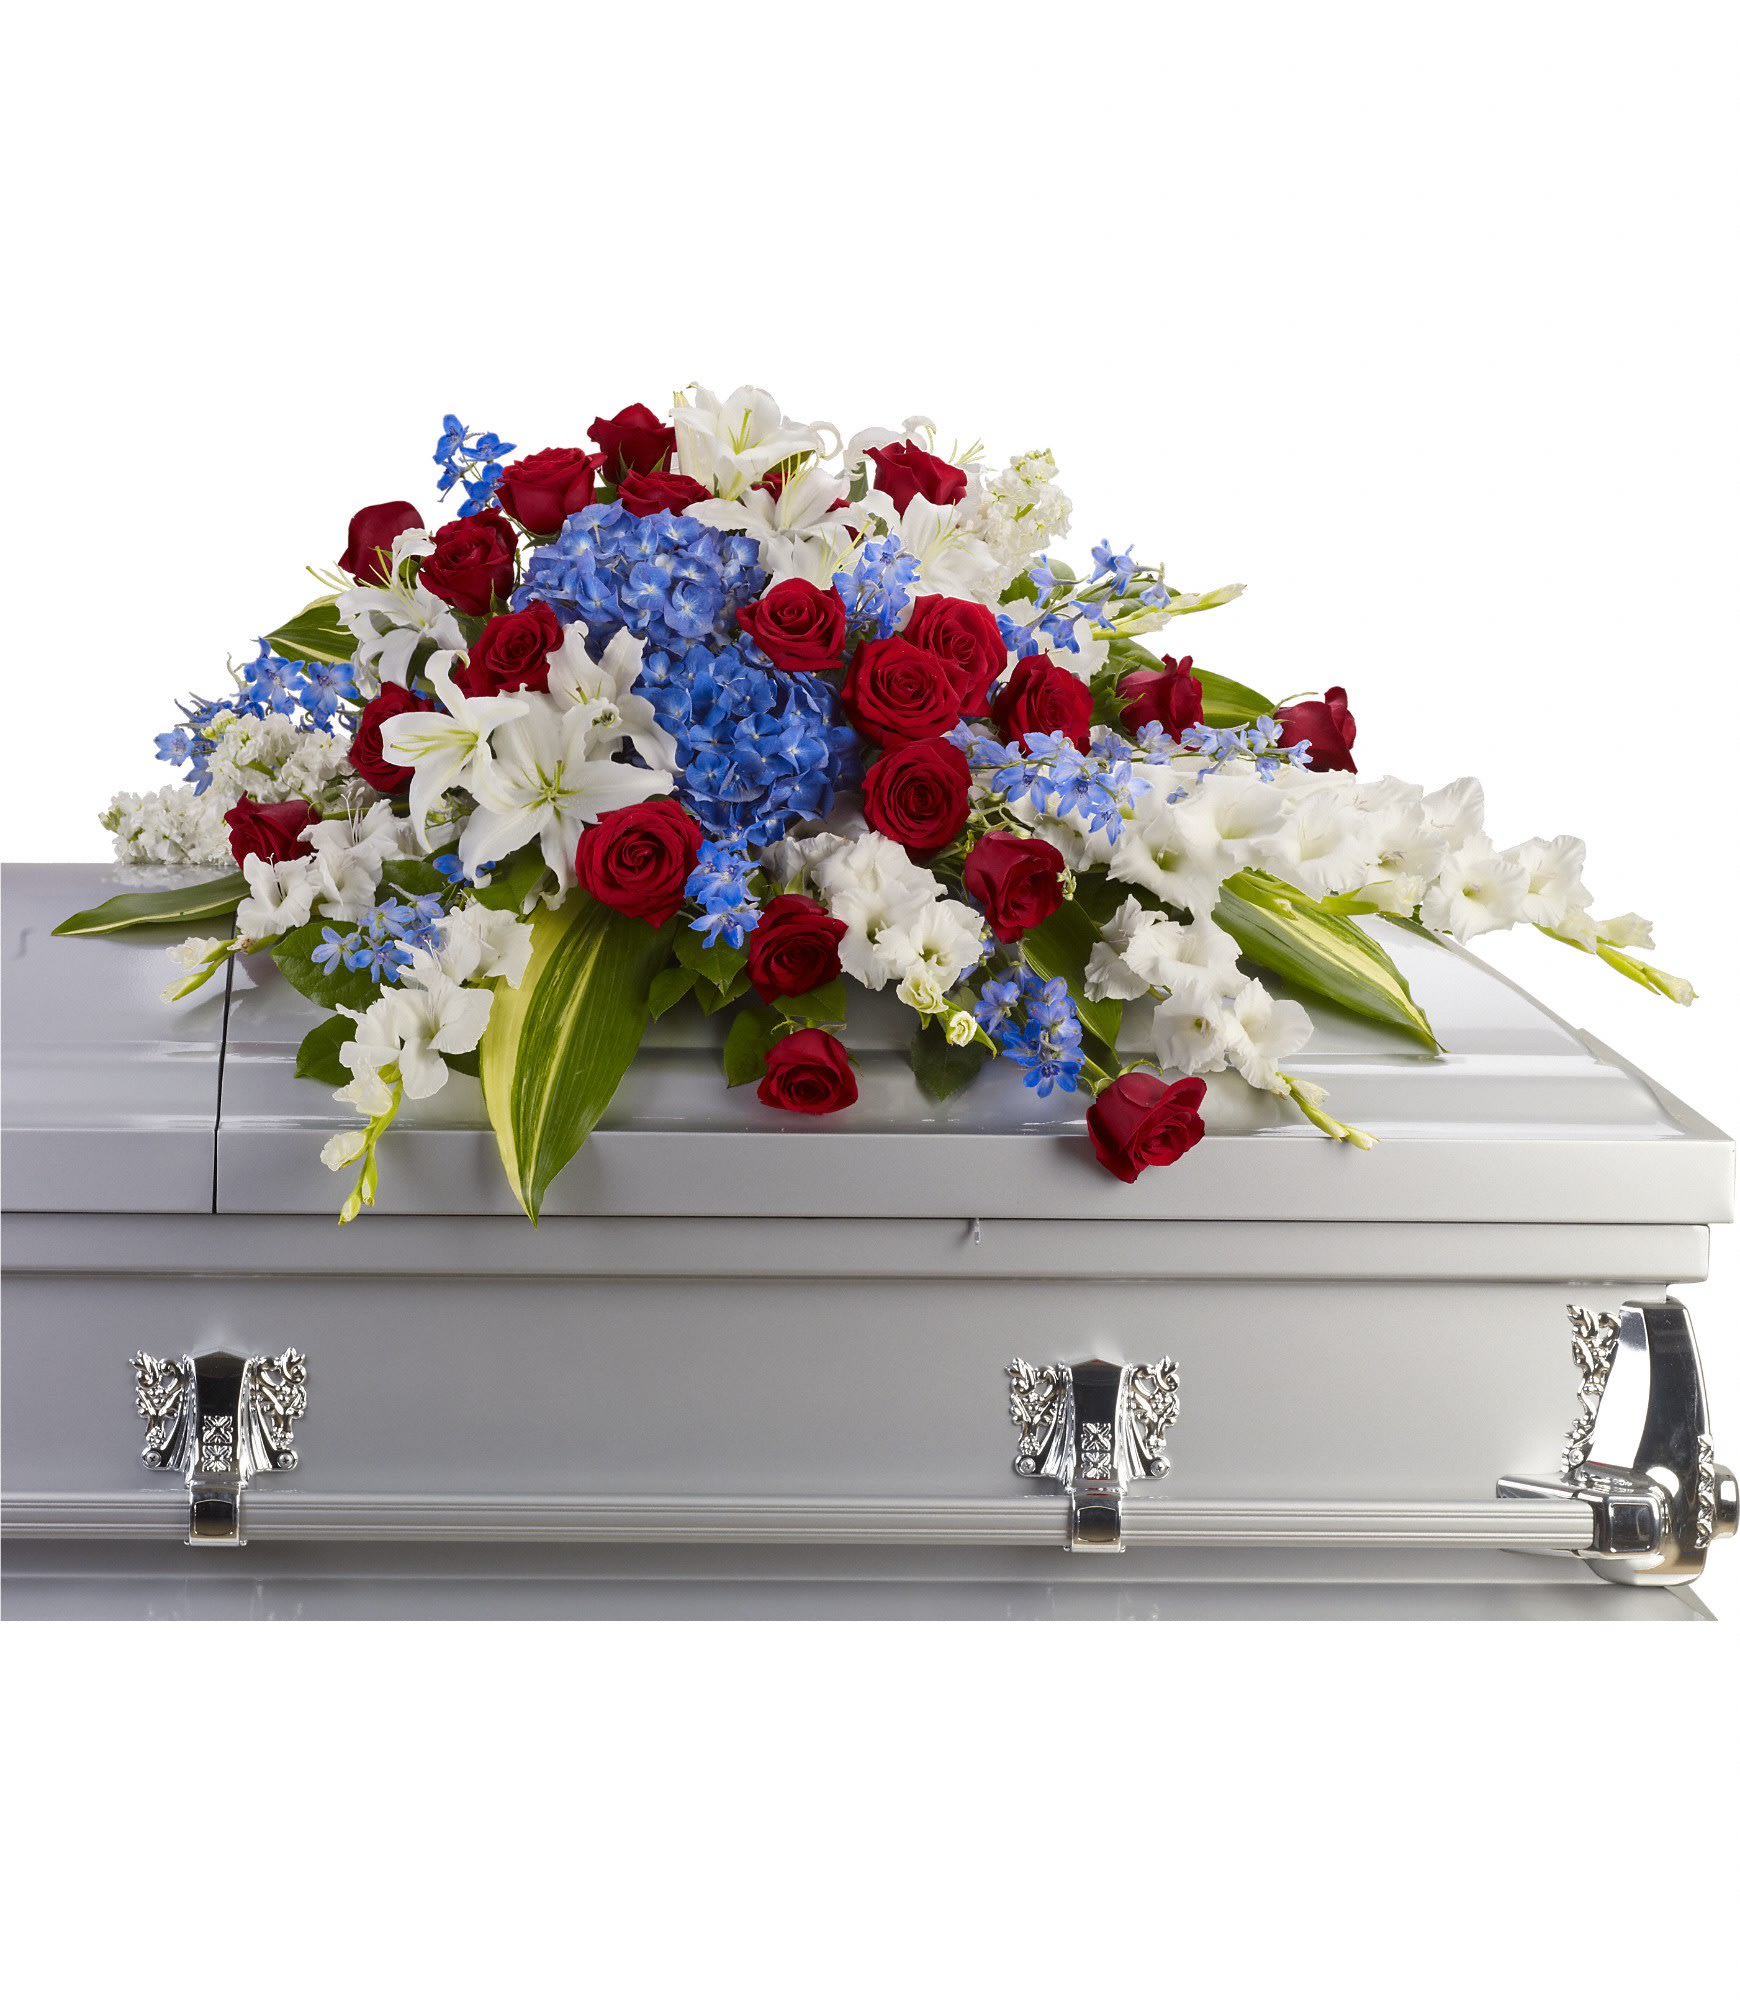 Distinguished Service Open Casket Spray by Teleflora - A beautifully patriotic way to pay tribute to a loved one. This half-couch spray sends an eloquent message of strength, respect and freedom. Available in full casket version, please call for details. May we add a custom banner? Please call to discuss. 